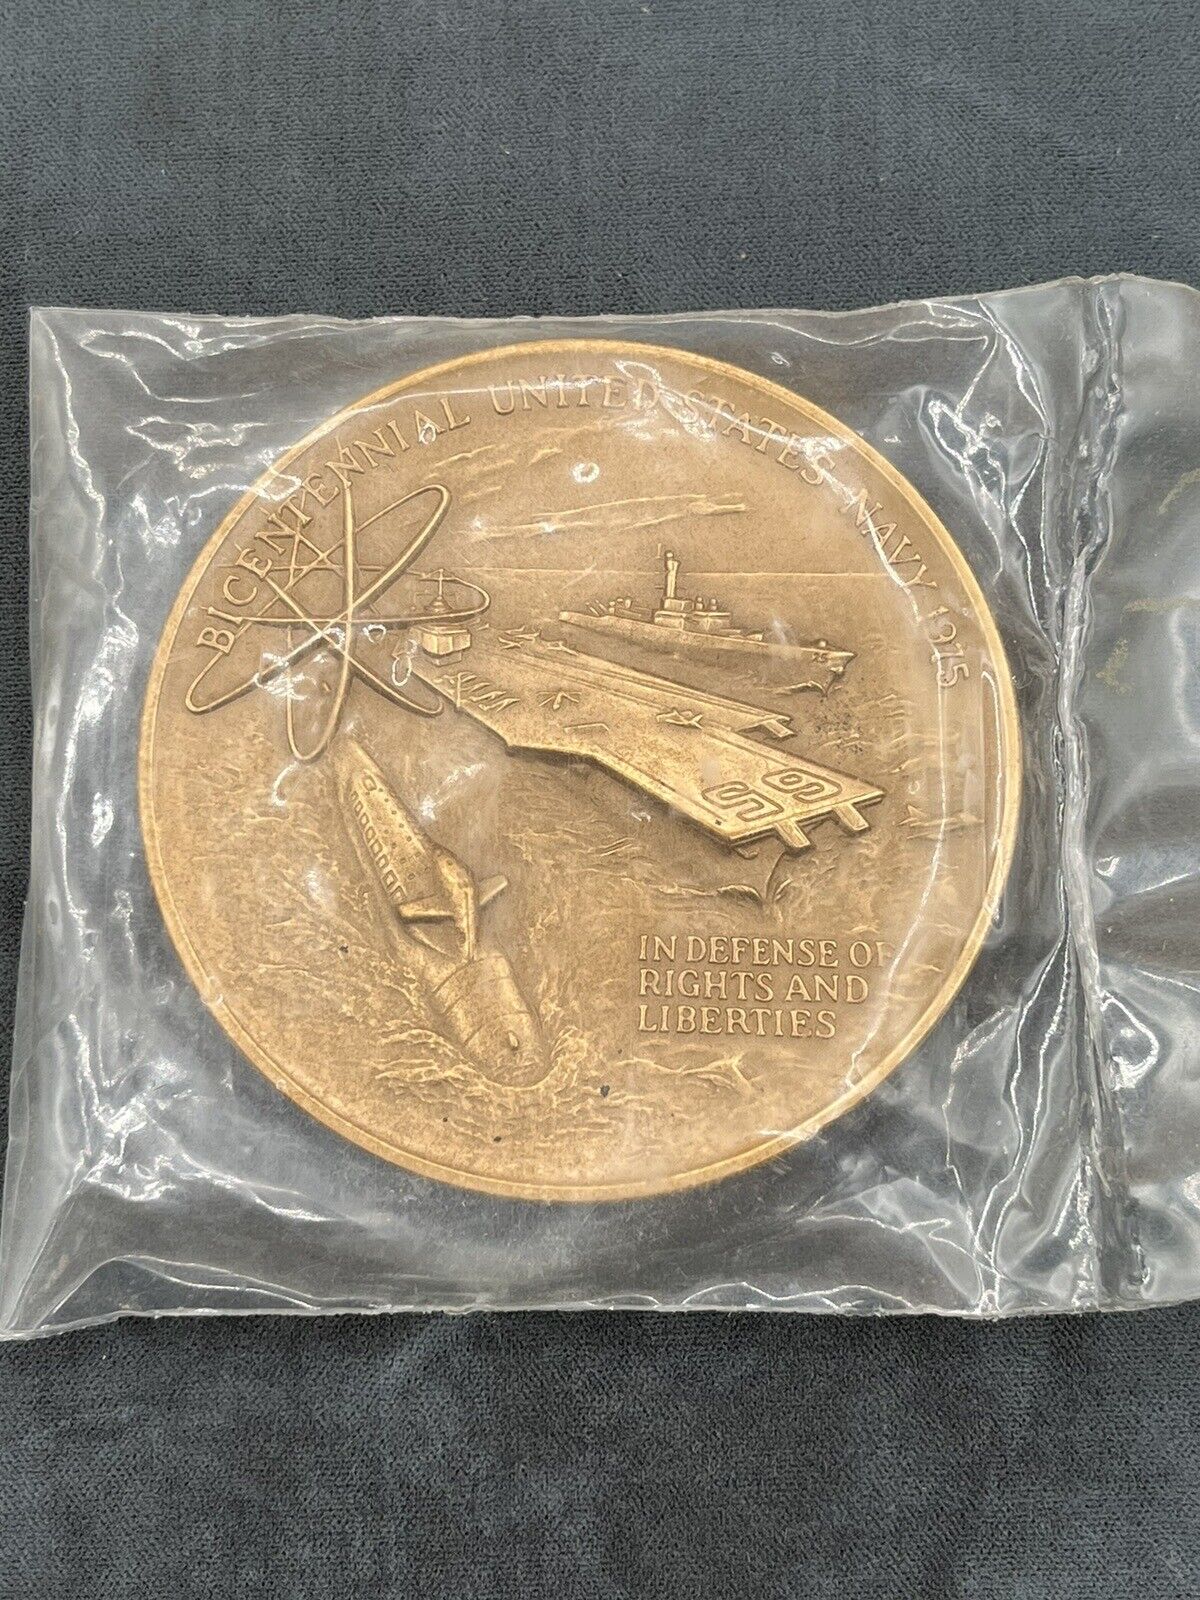 1975 United States Mint - US Navy 1775 Bicentennial Medal - Bronze - NEW